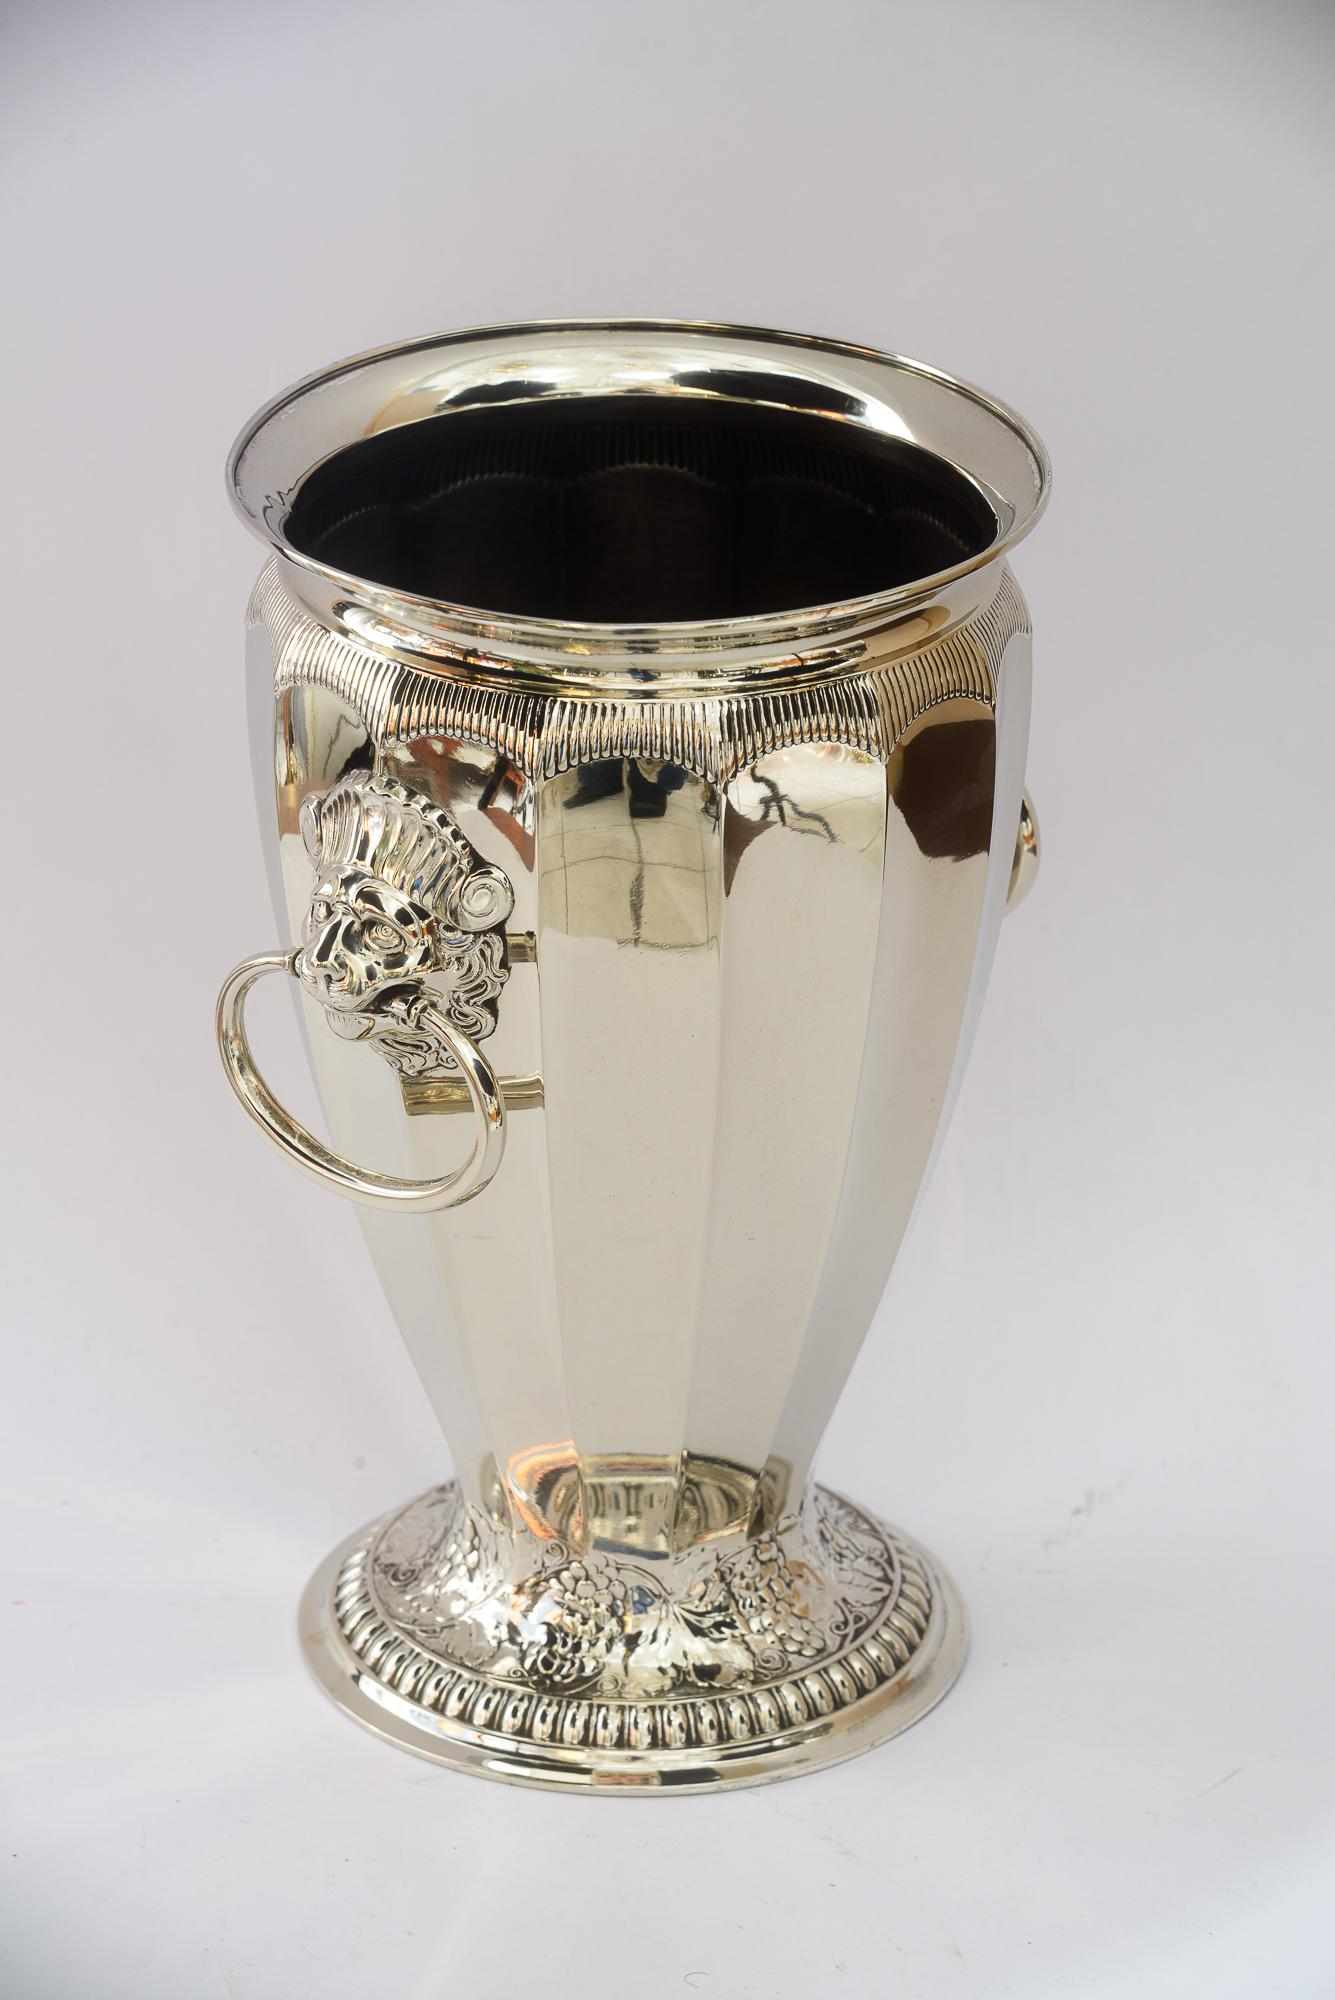 Art Deco Champagne or wine cooler alpaca vienna around 1920s
Only Polished